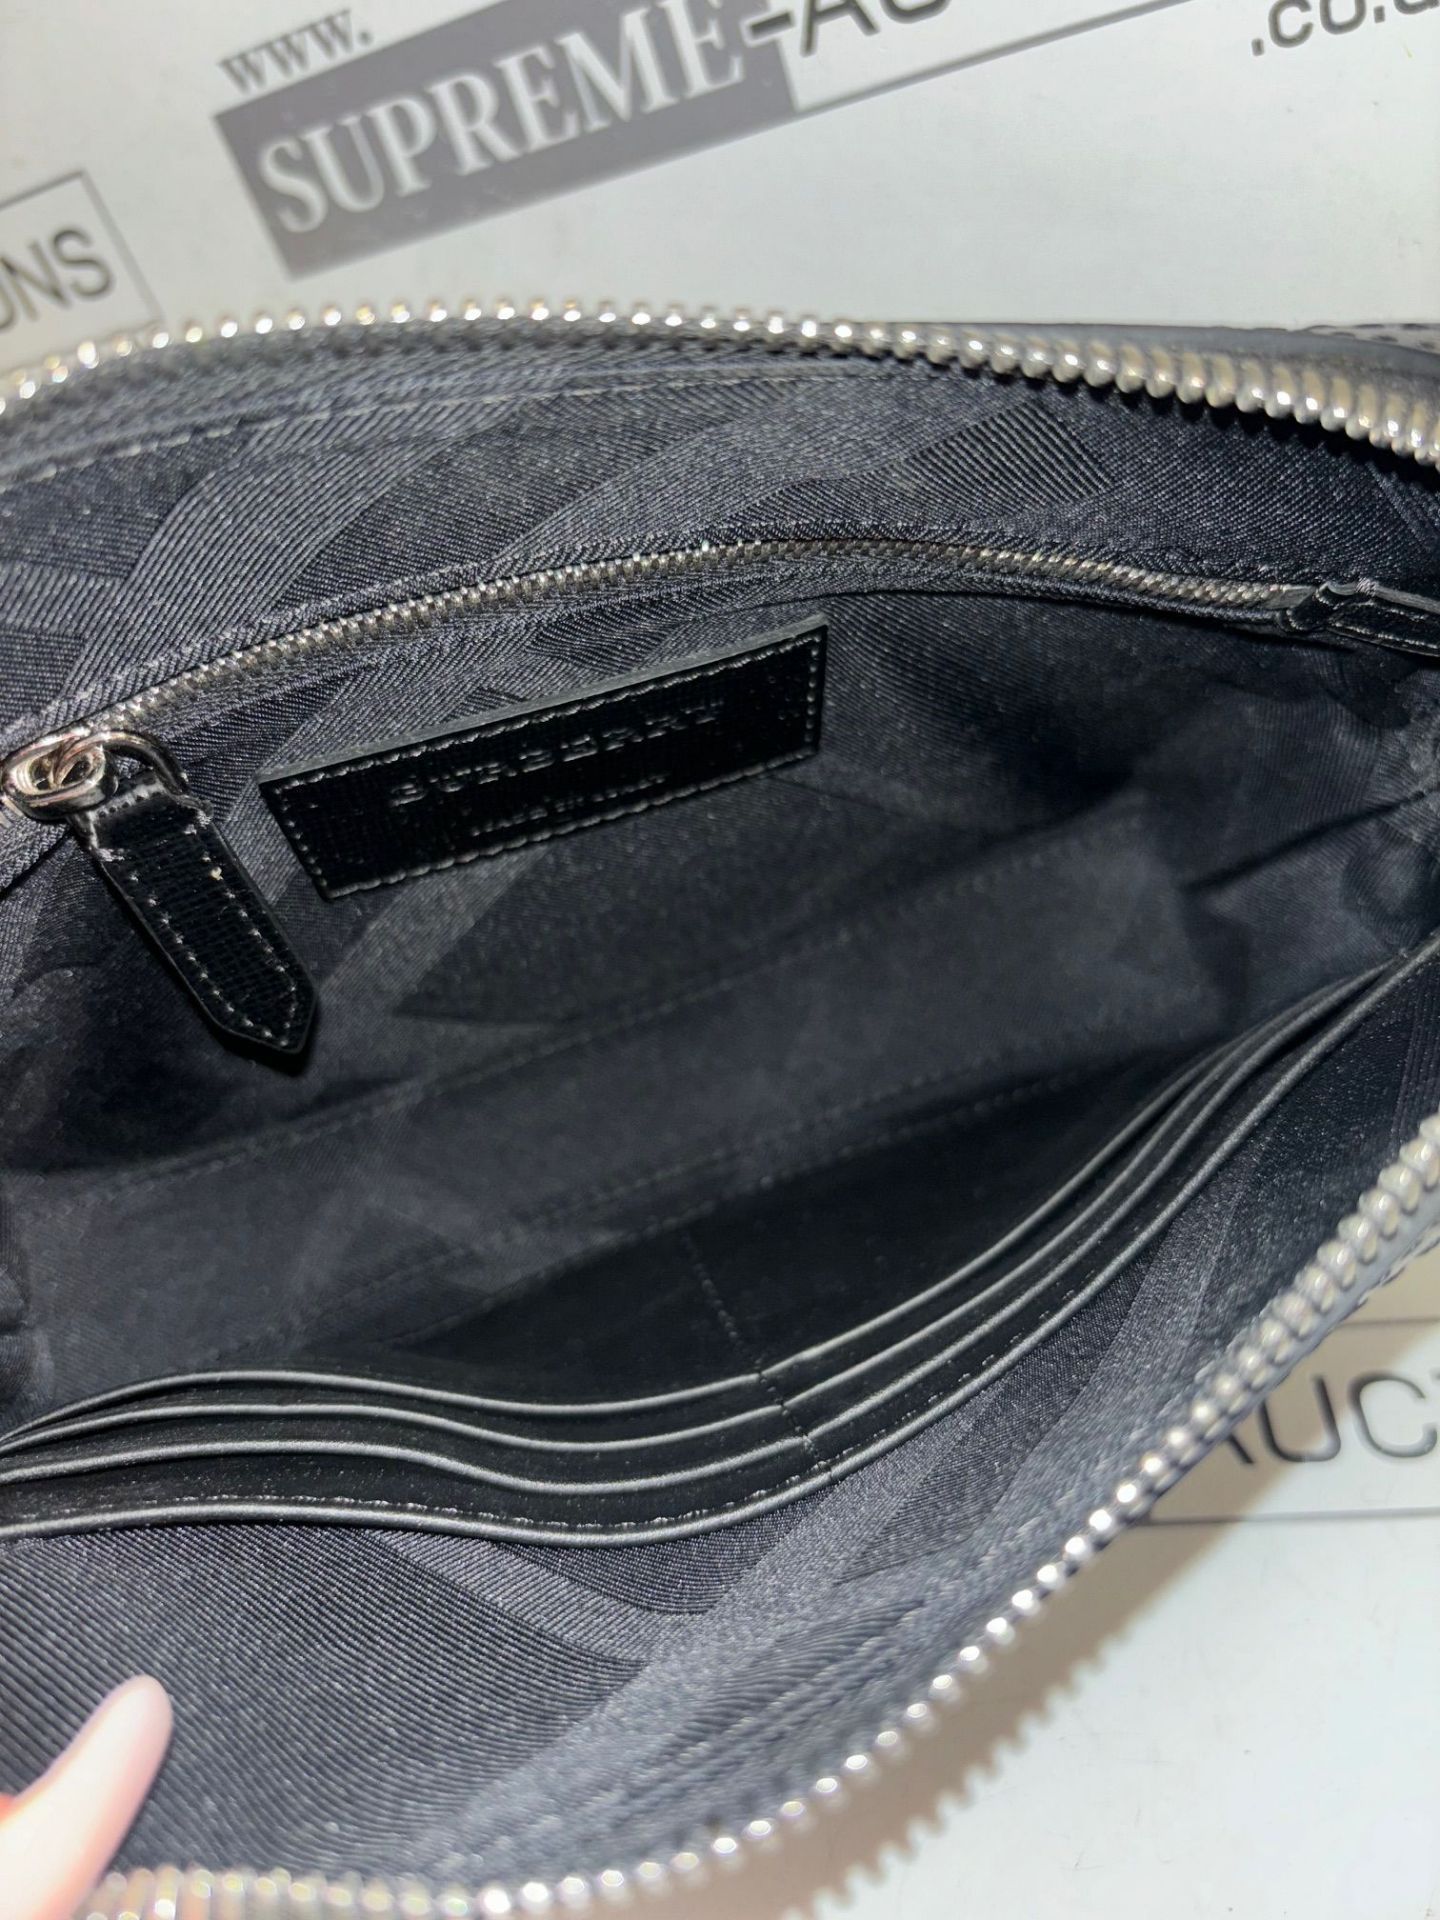 Genuine Burberry Saffiano Leather Clutch Bag In Black. RRP £885.00. 100H/30 - Image 9 of 10